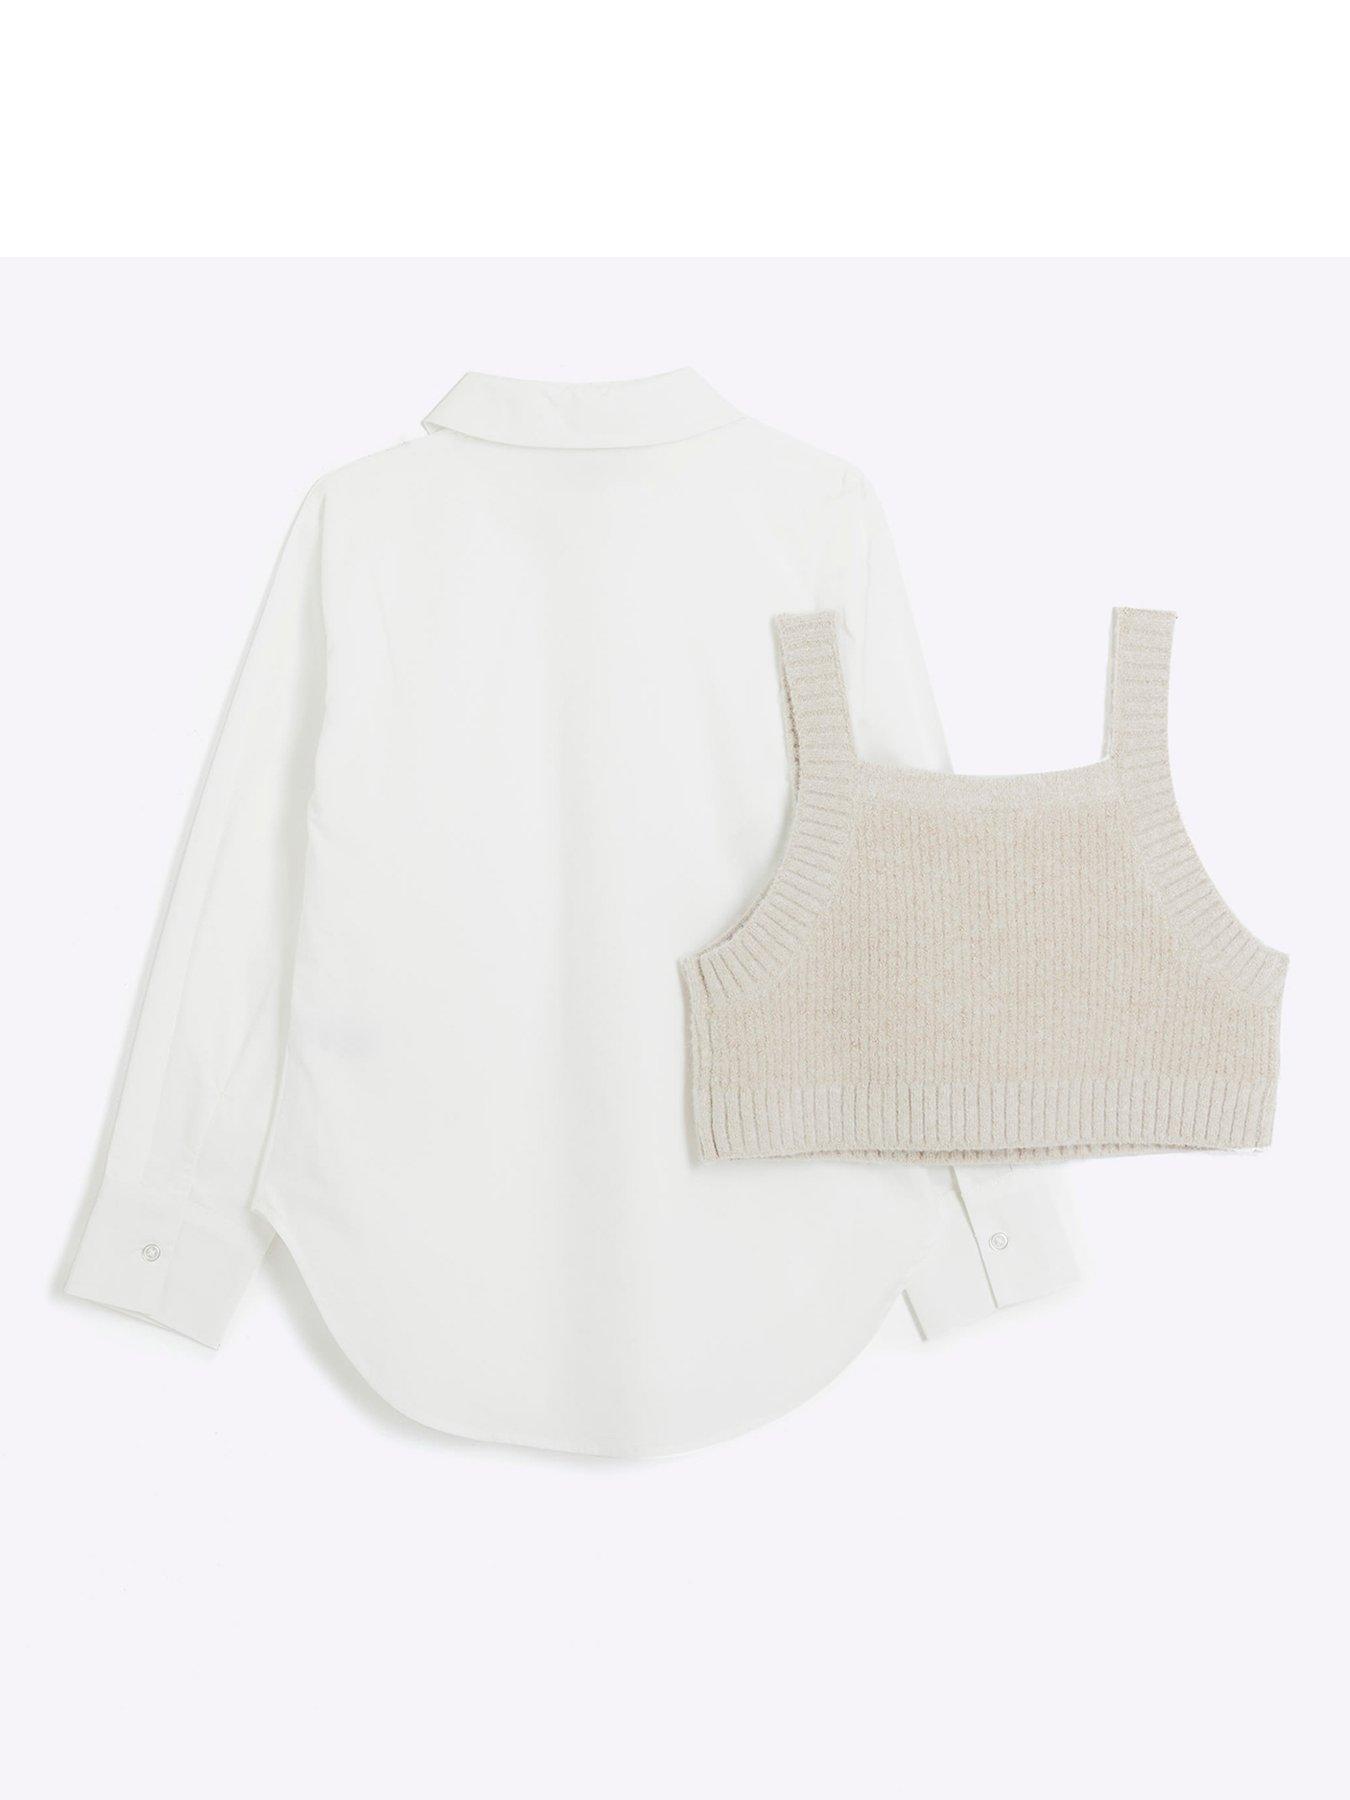 River Island Girls Pearl Hybrid Vest And Shirt Top - Beige | Very.co.uk